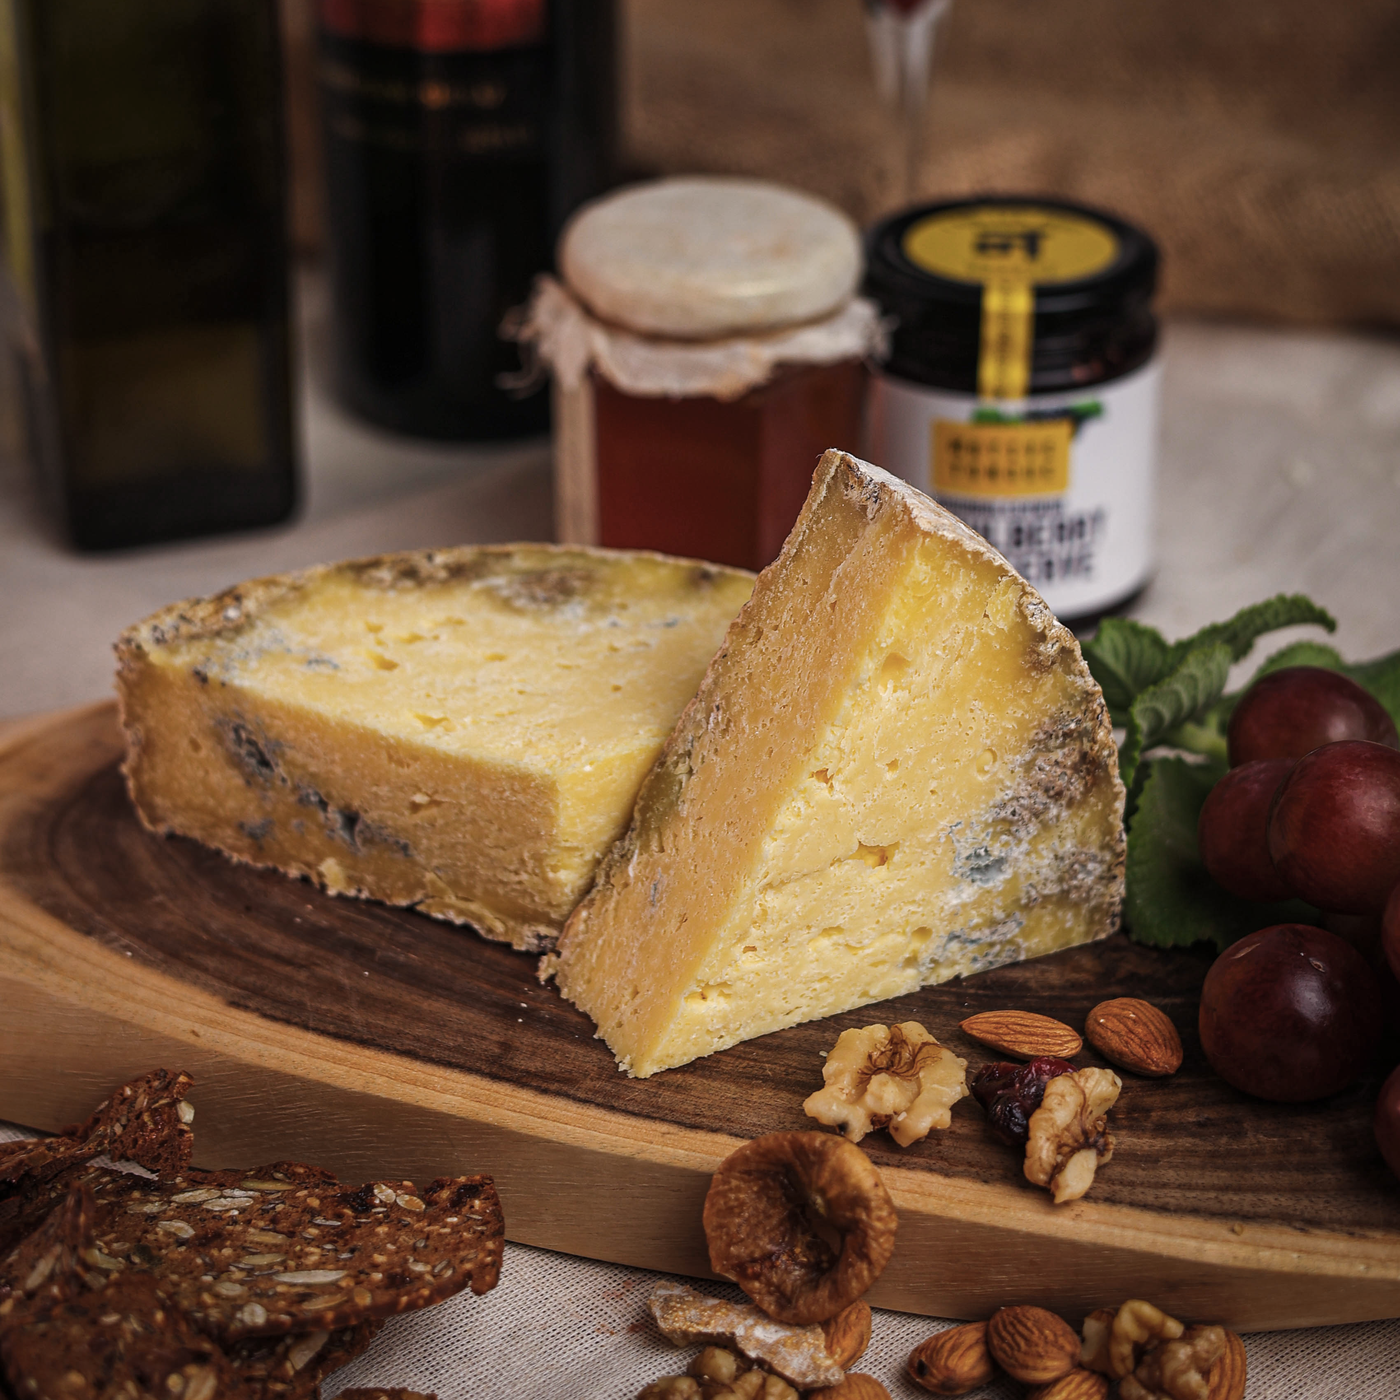 This is our play on a blue style, the cheese has two different blends of lactic and cooked cheese curds. Modelled on a Stilton, the cheese is aged below 3 months. The distinctive feature of the cheese is its blue veins across all cross sections with a bright buttery tang.